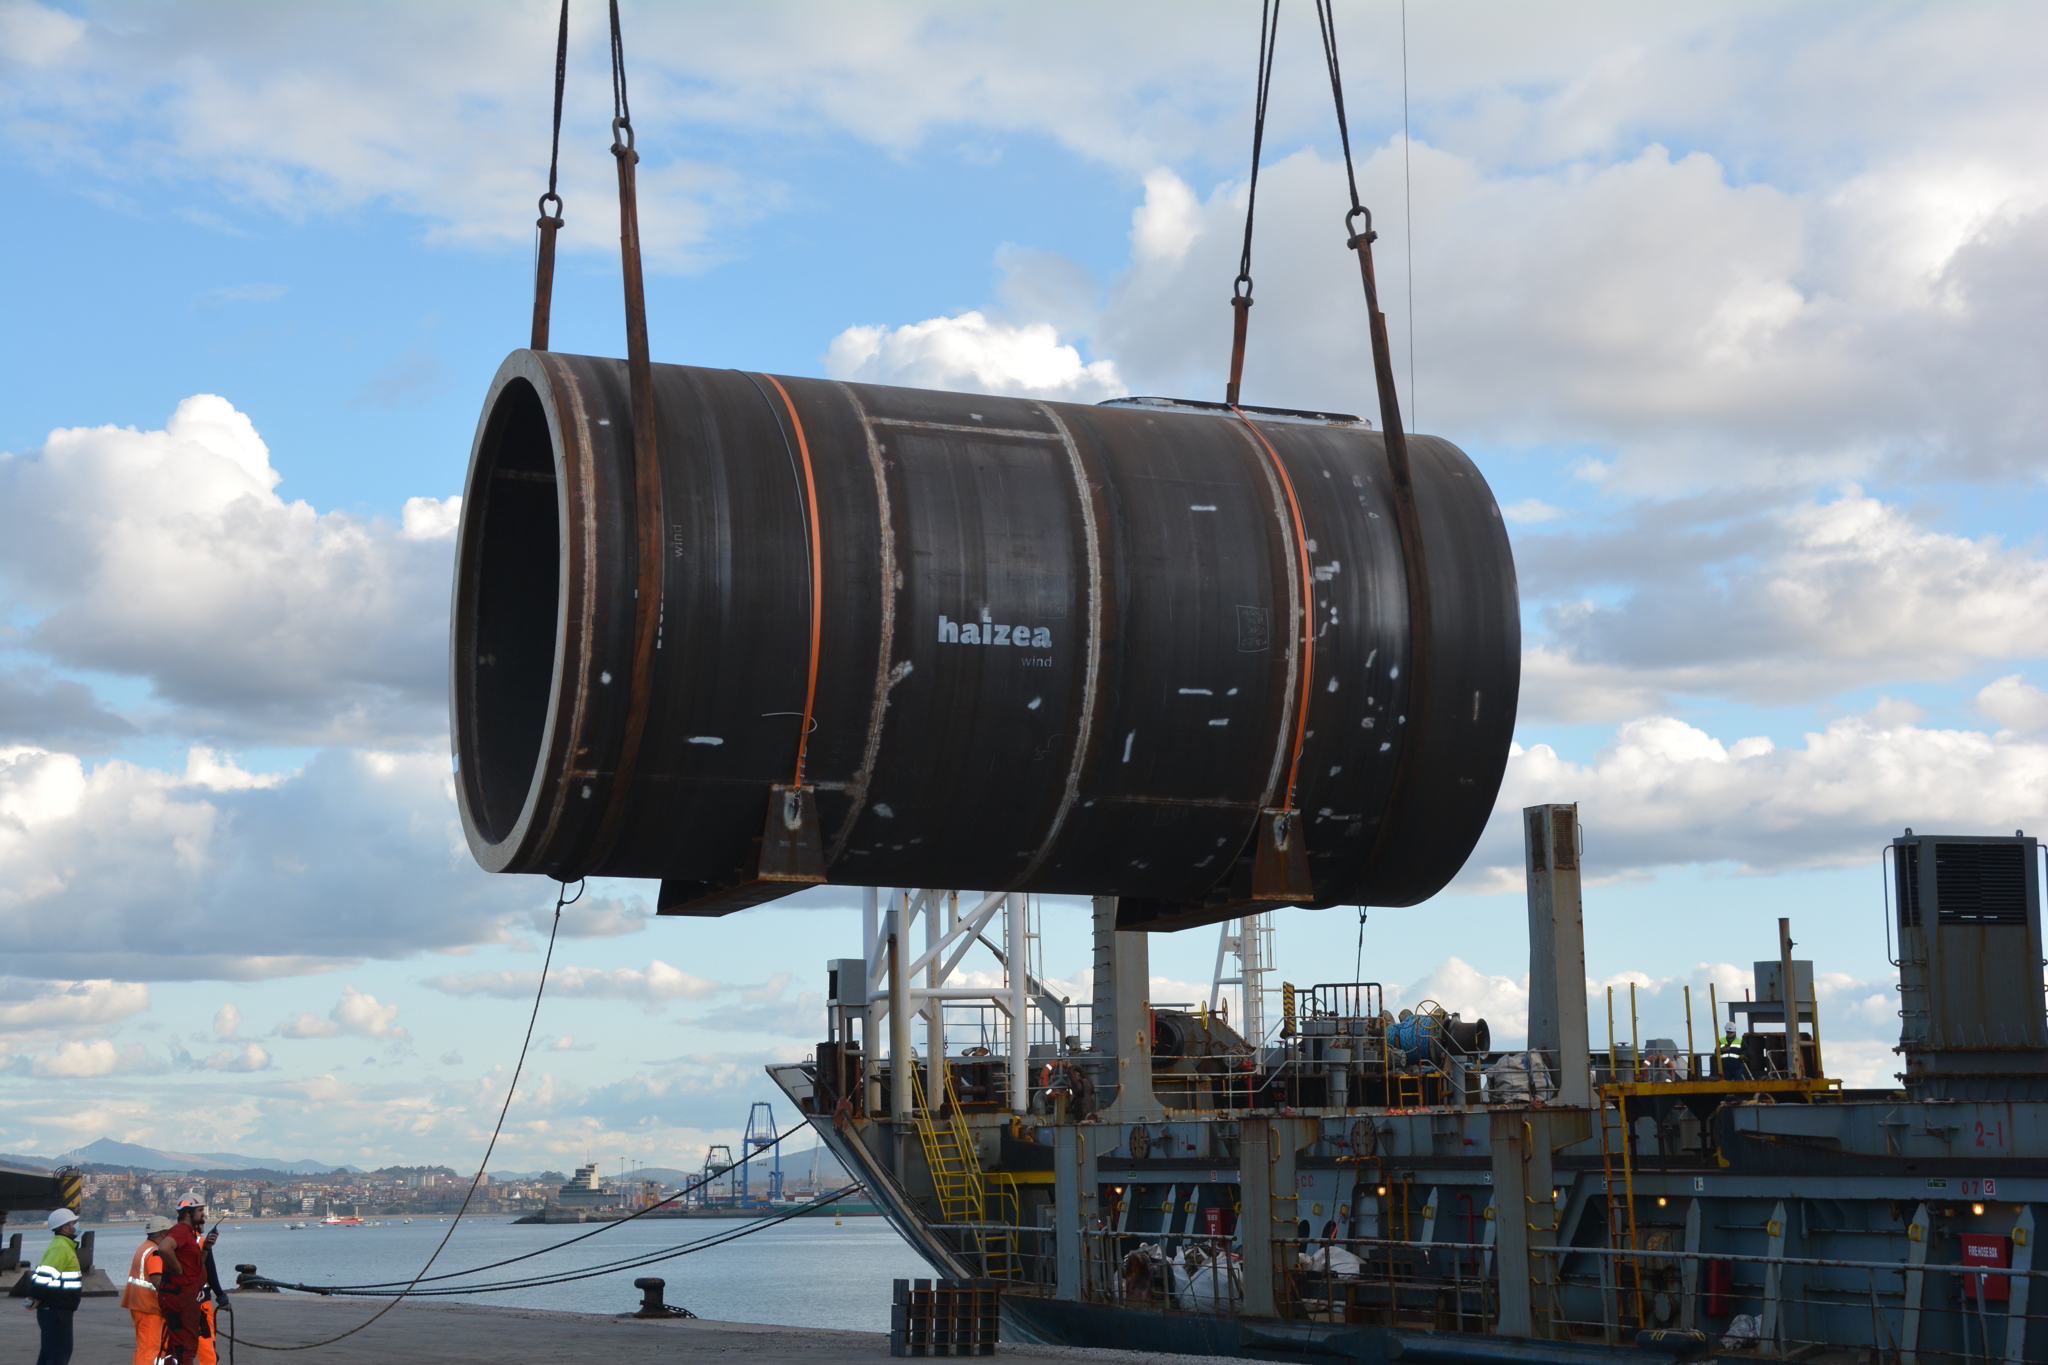 A transition piece barrel being loaded by a crane onto a transport vessel in bilbao